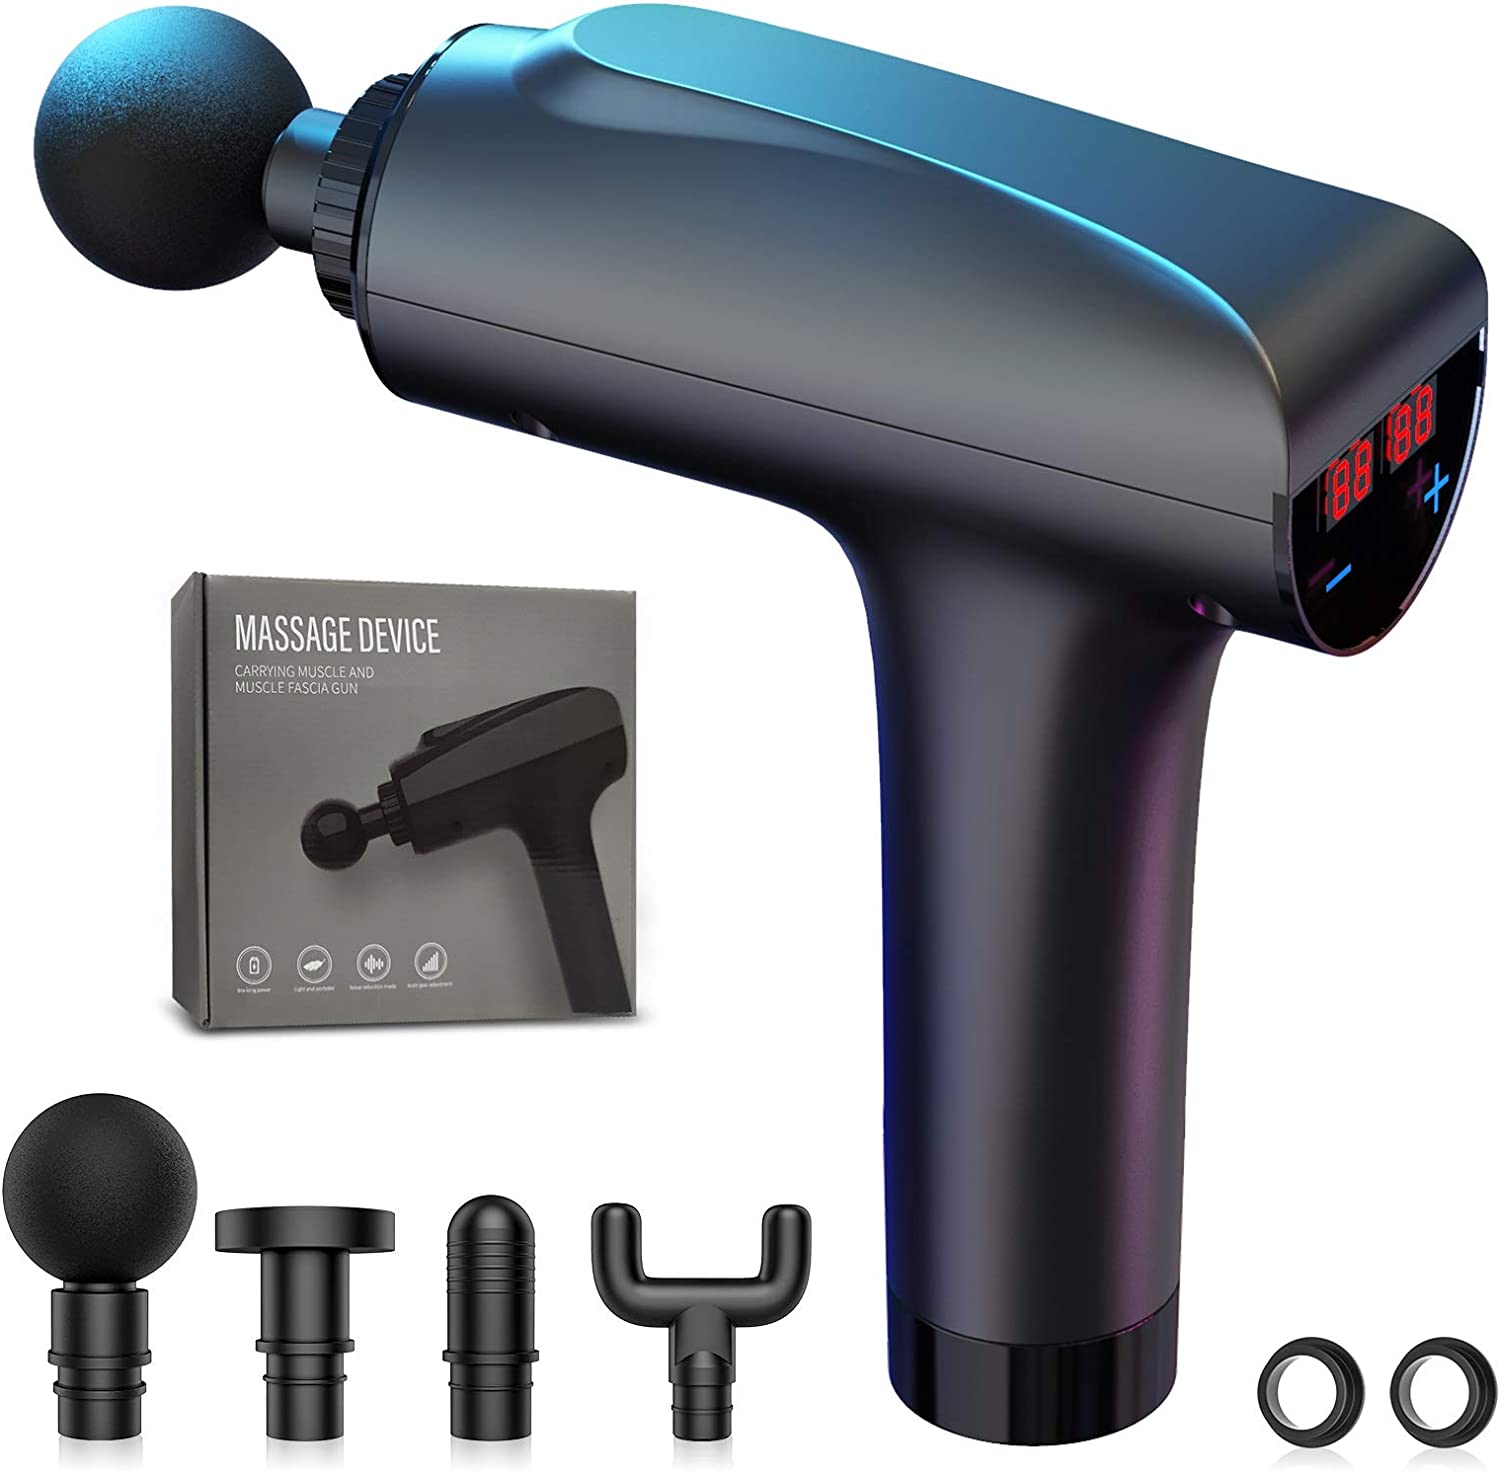  7. Handheld Percussion Massagers 